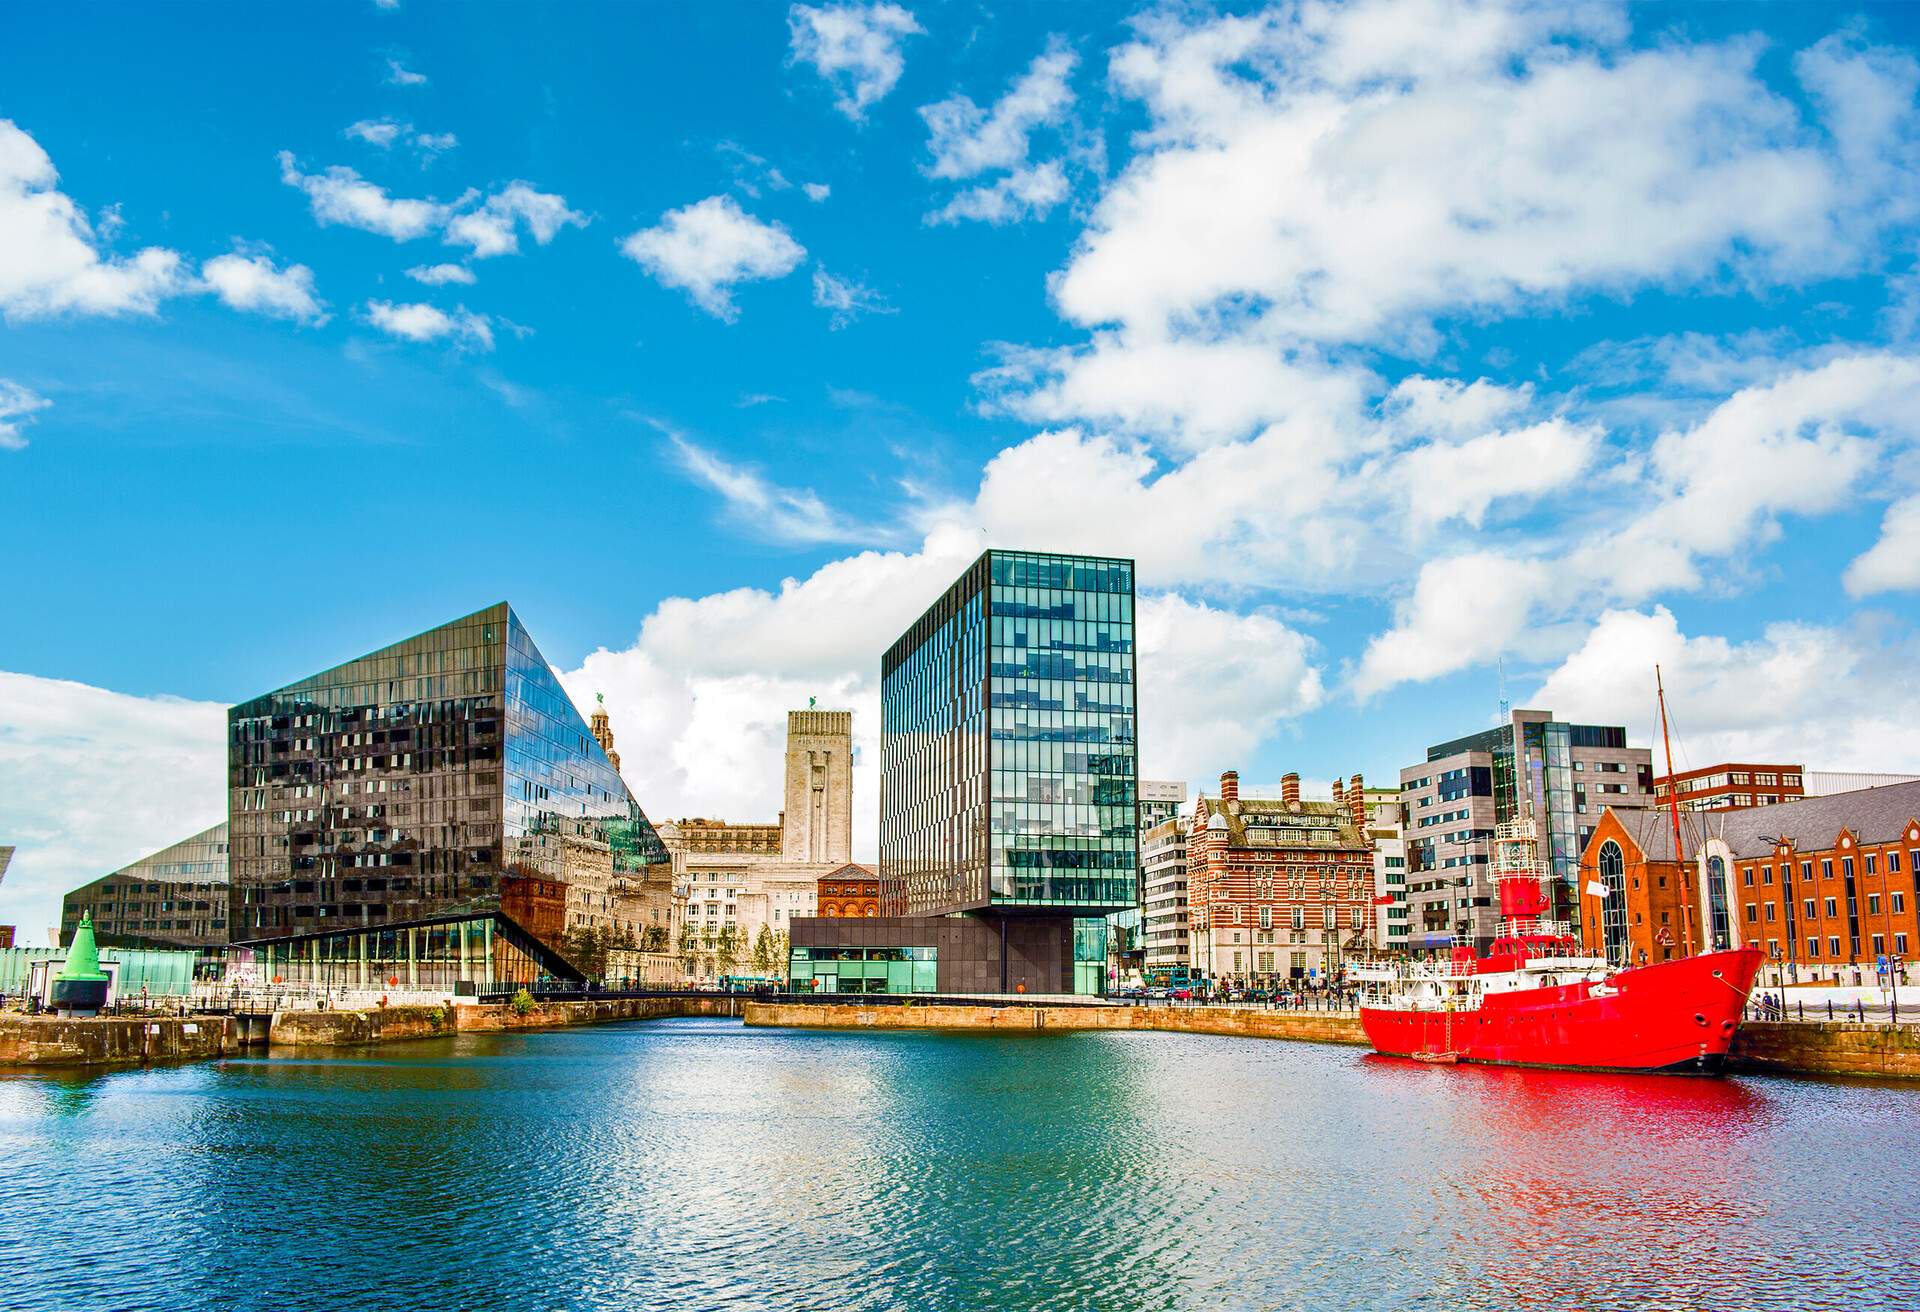 A small red ship docked along a river lined with colourful buildings near a picturesque two adjacent glass buildings under a cloudy blue sky.